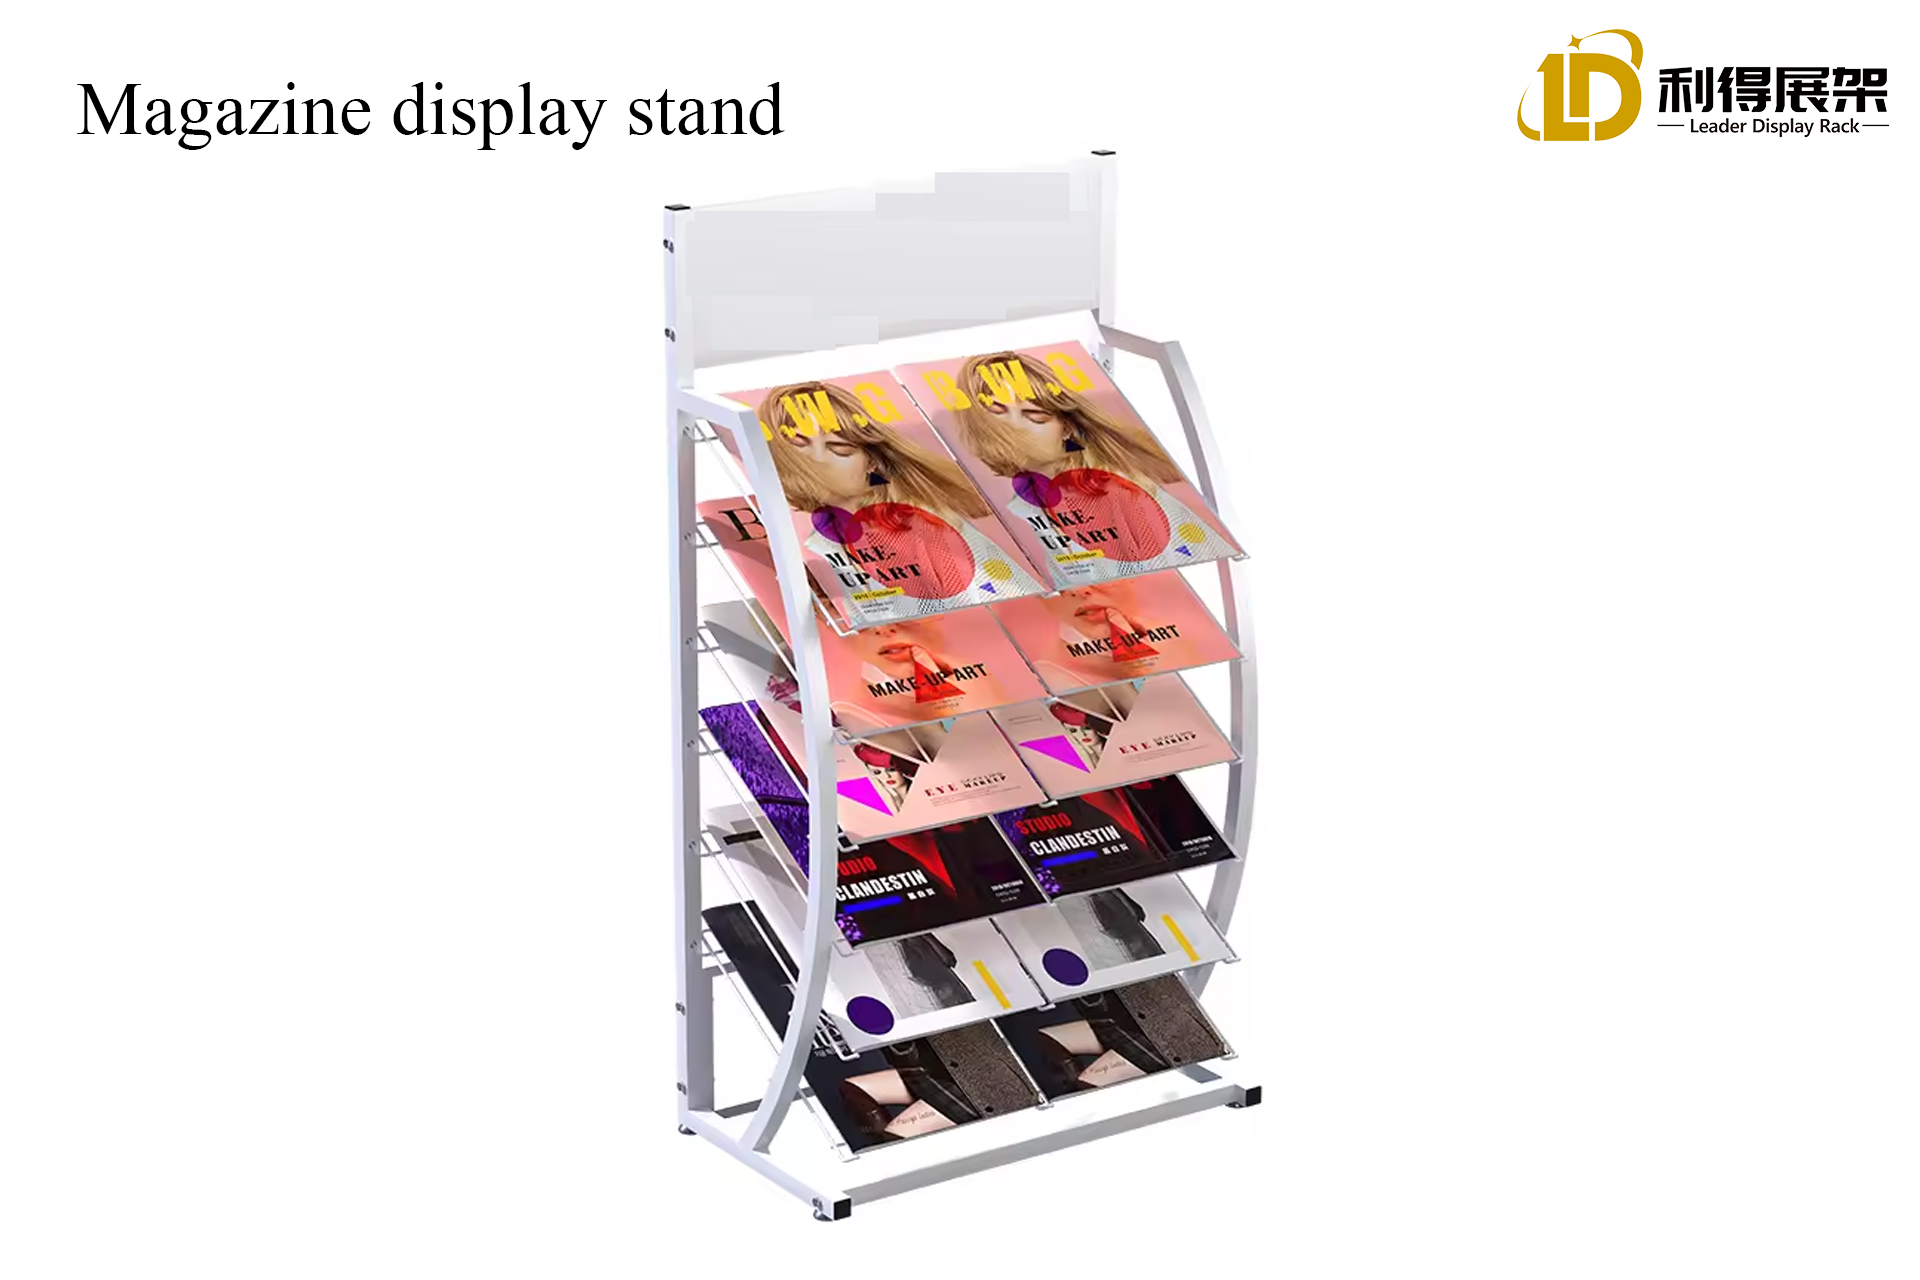 The Material And Structure of The Magazine Display Stand Are Discussed To Balance Durability And Aesthetics